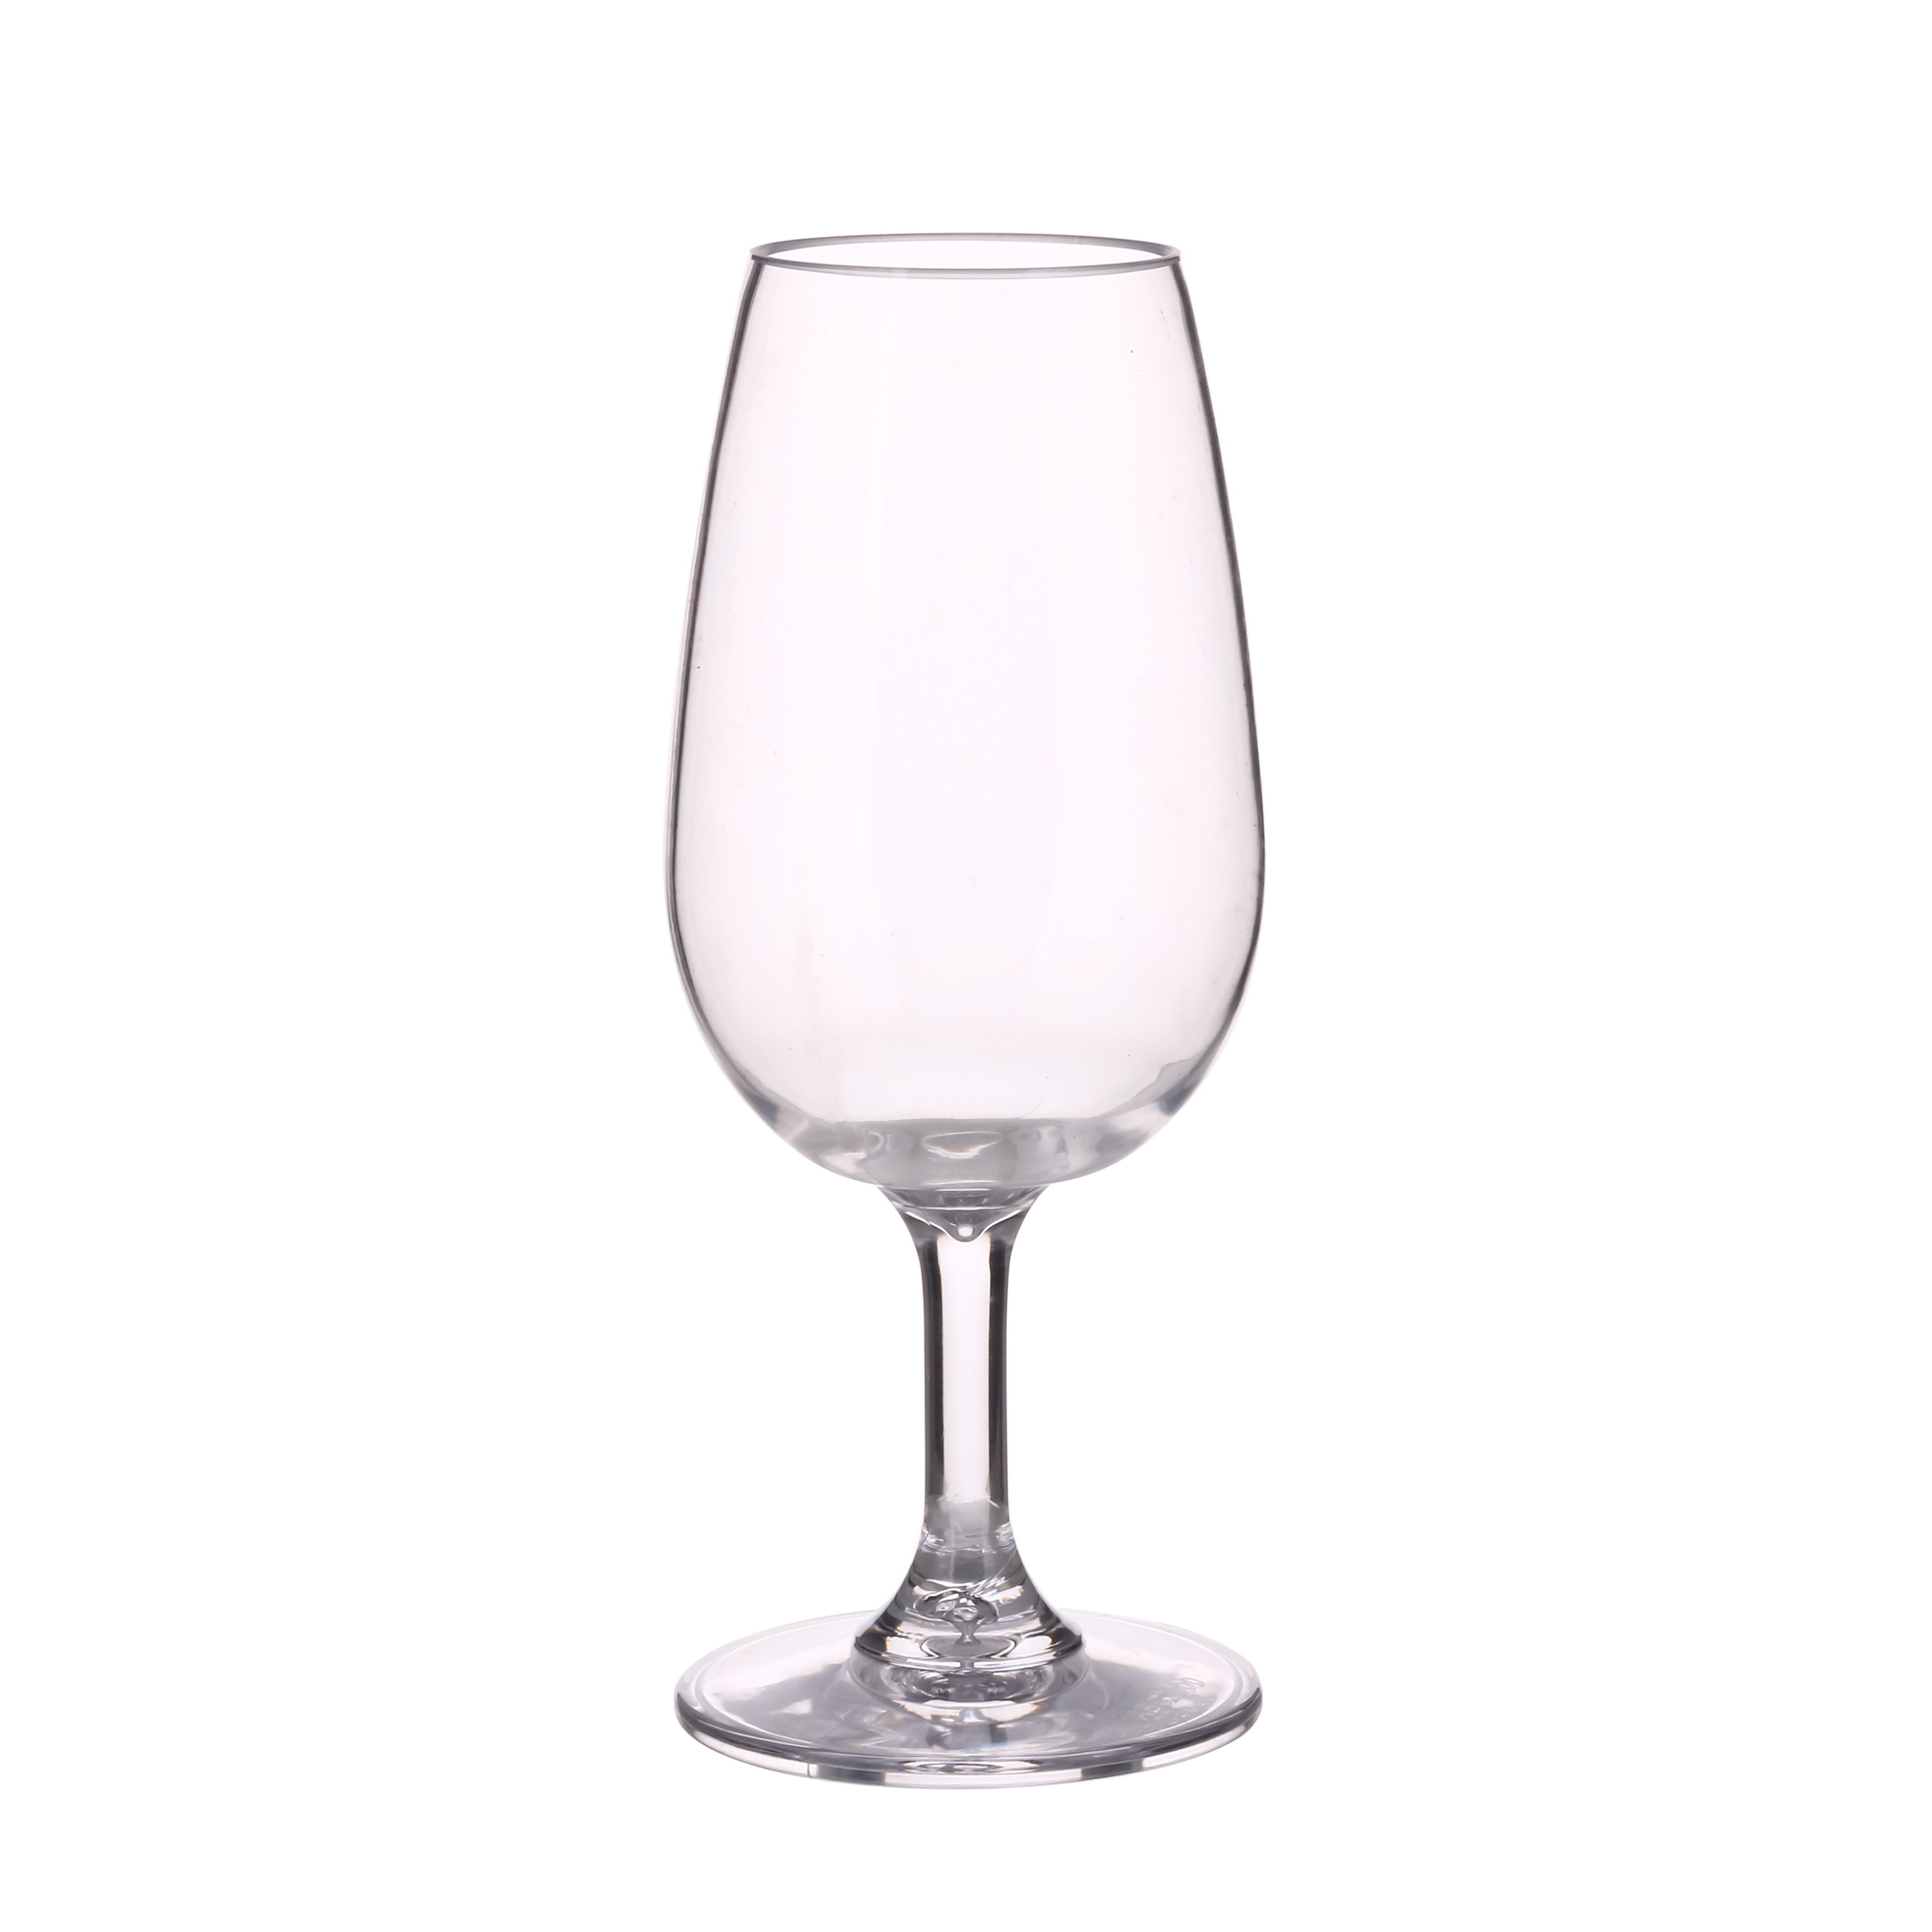 China Factory for Large Wine Glasses - Charmlite High Transparent Clear Tritan Wine Glass Shatterproof Thick Base Wine Glass – 7oz – Charmlite